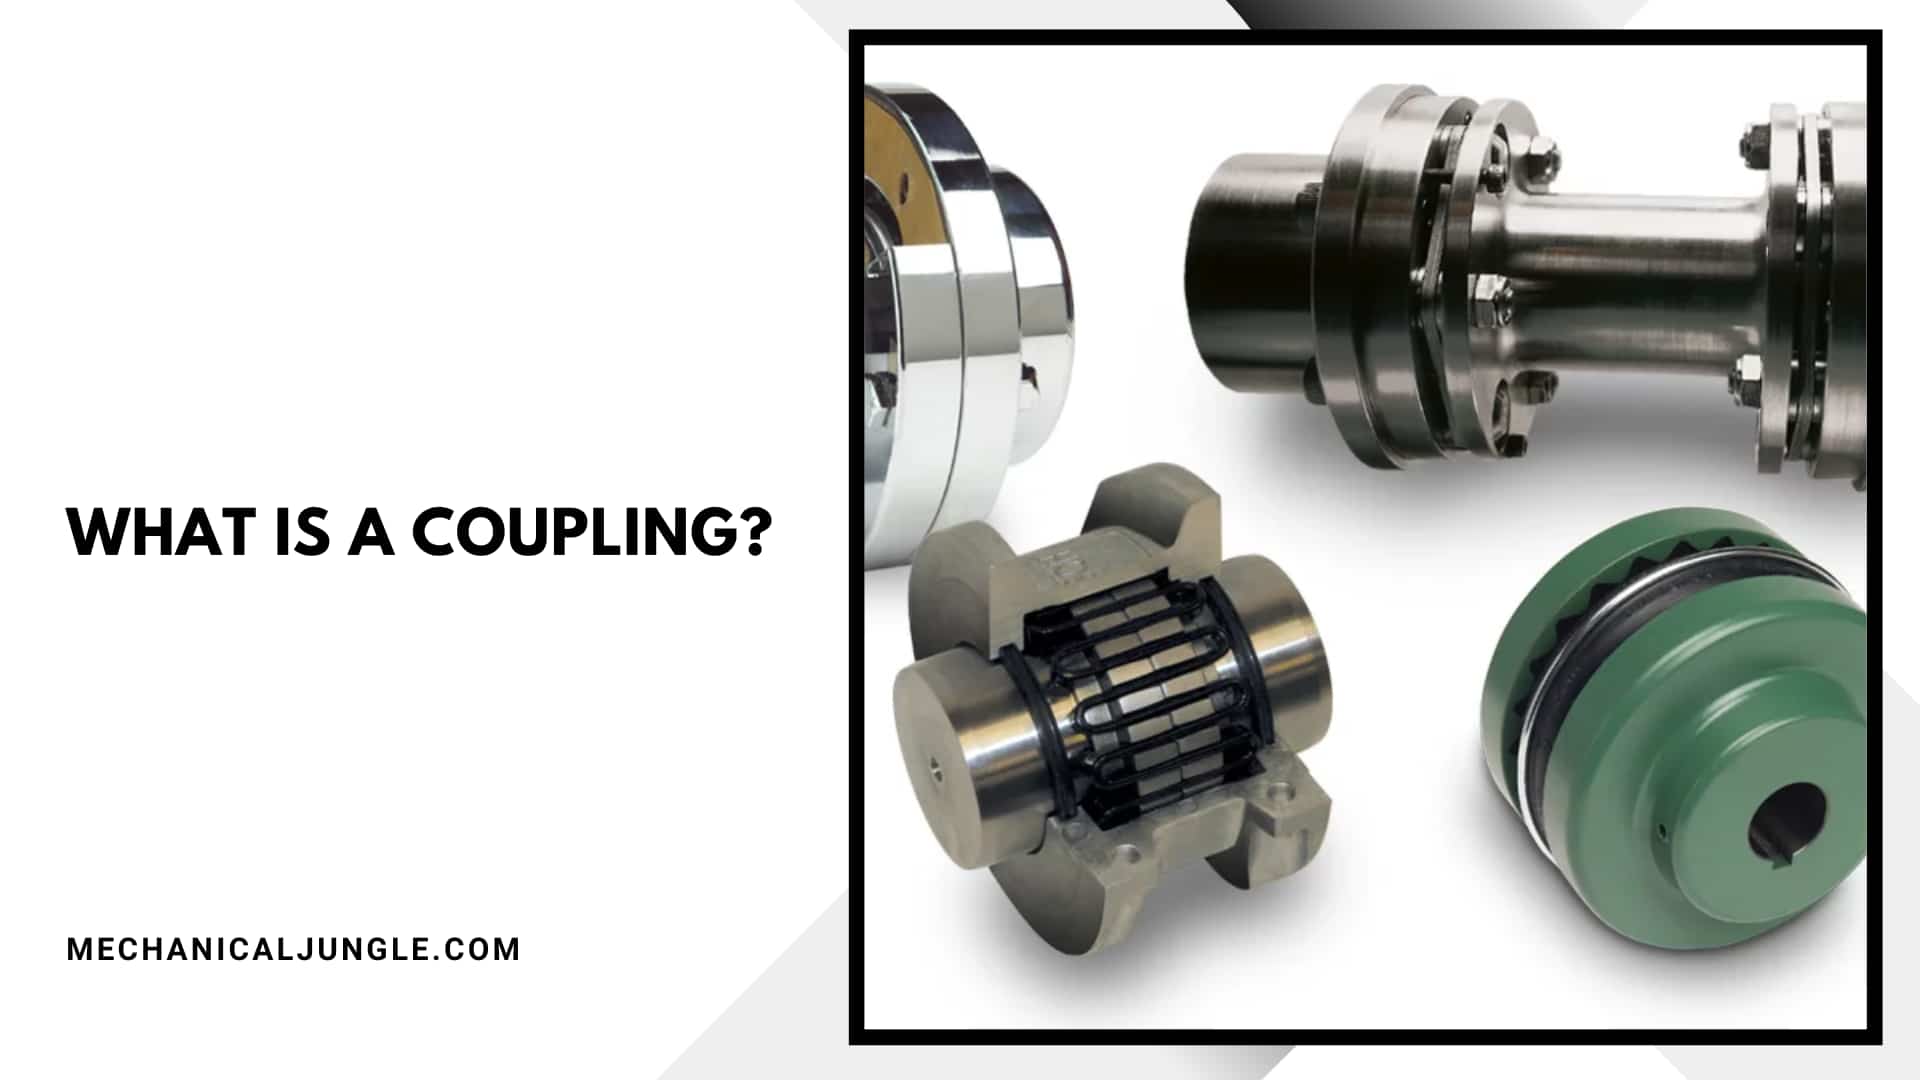 What Is a Coupling?